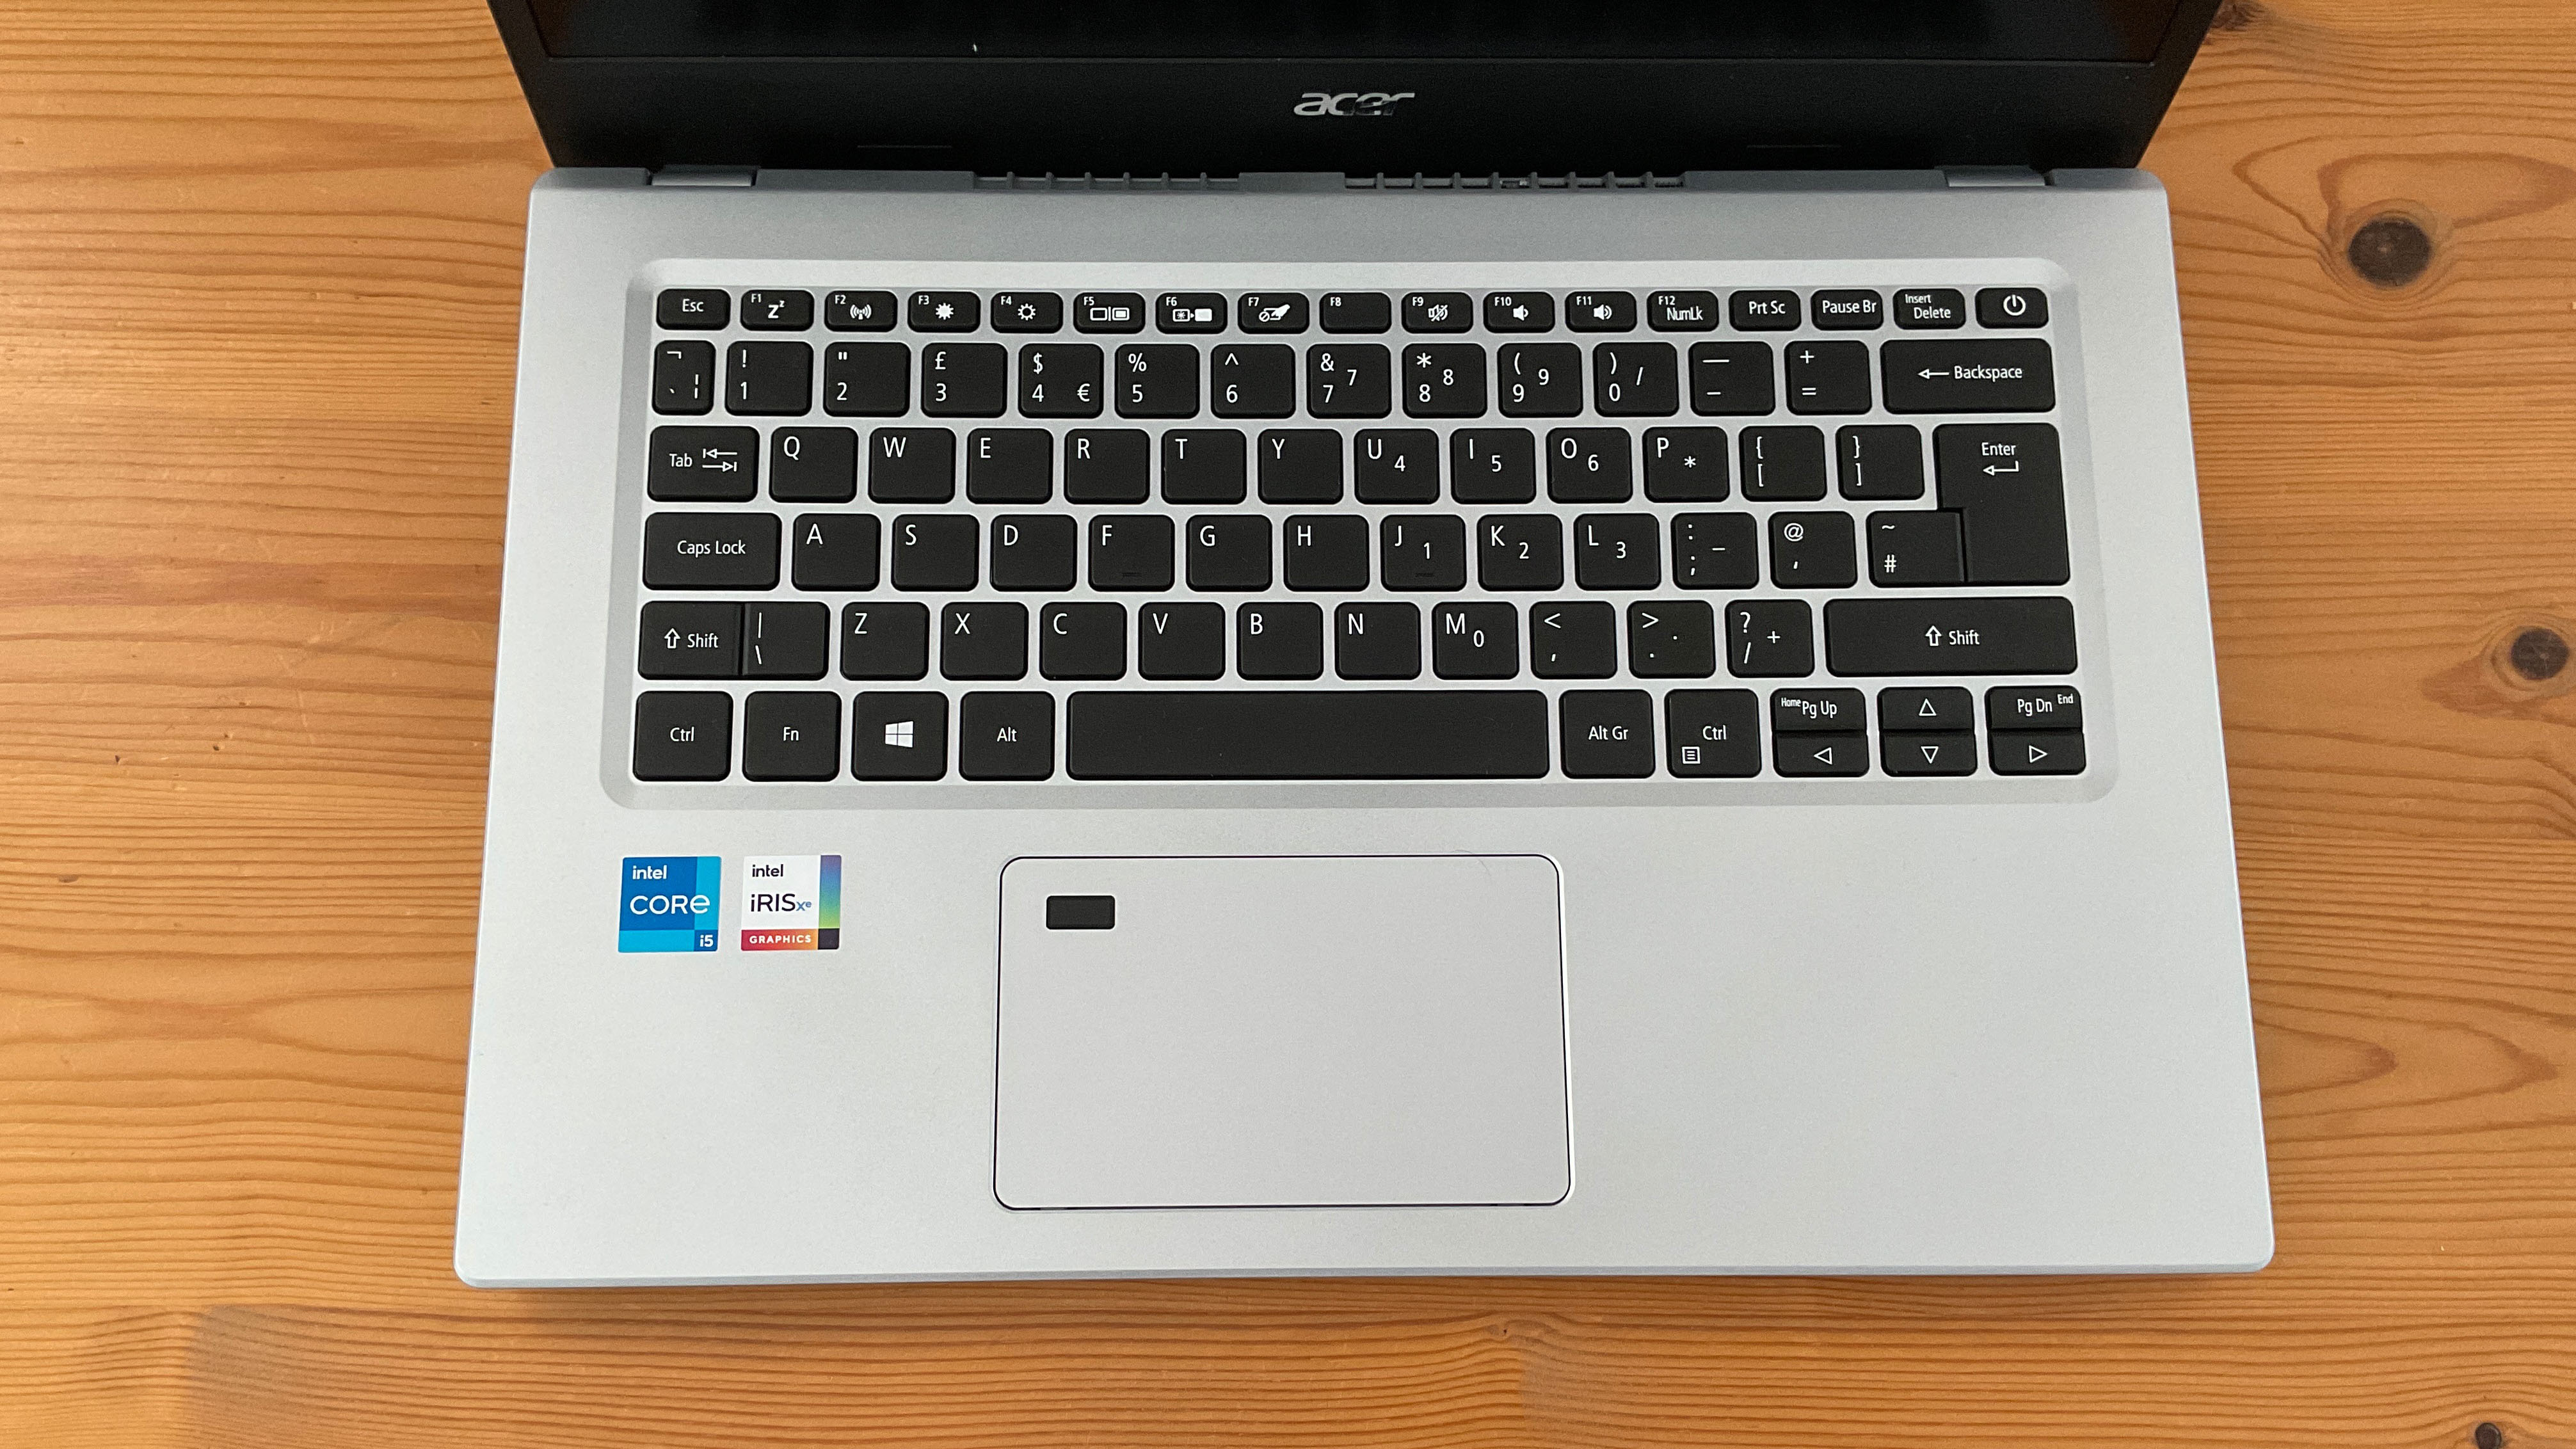 Acer Aspire 5 laptop keyboard viewed from top to bottom